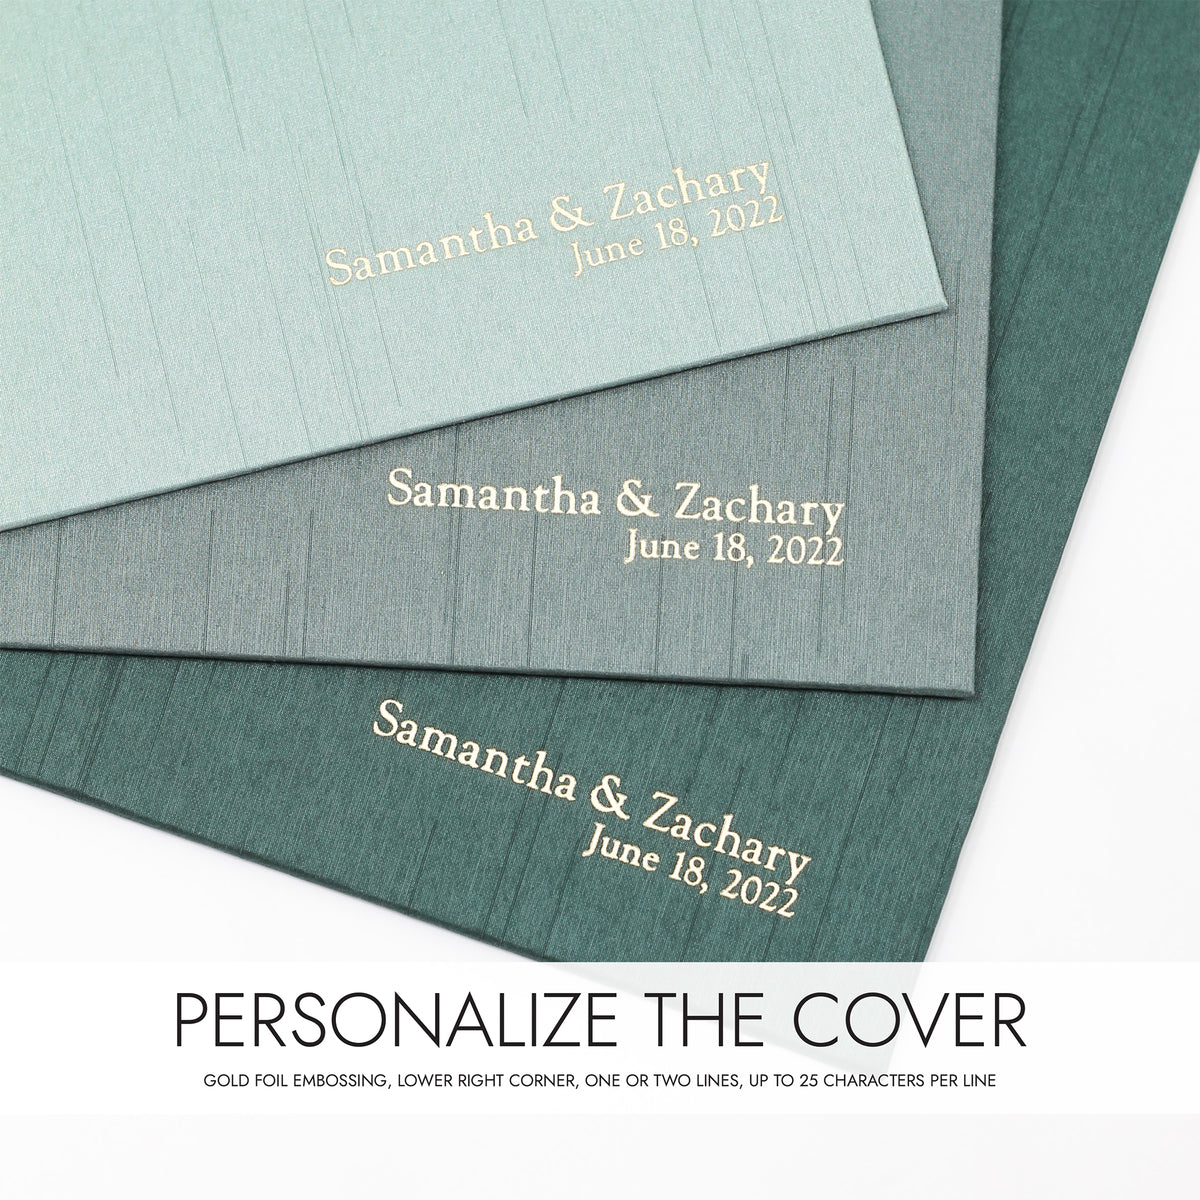 Deluxe 12 x 15 Paper Page Album | Cover: Misty Blue Silk | Available Personalized